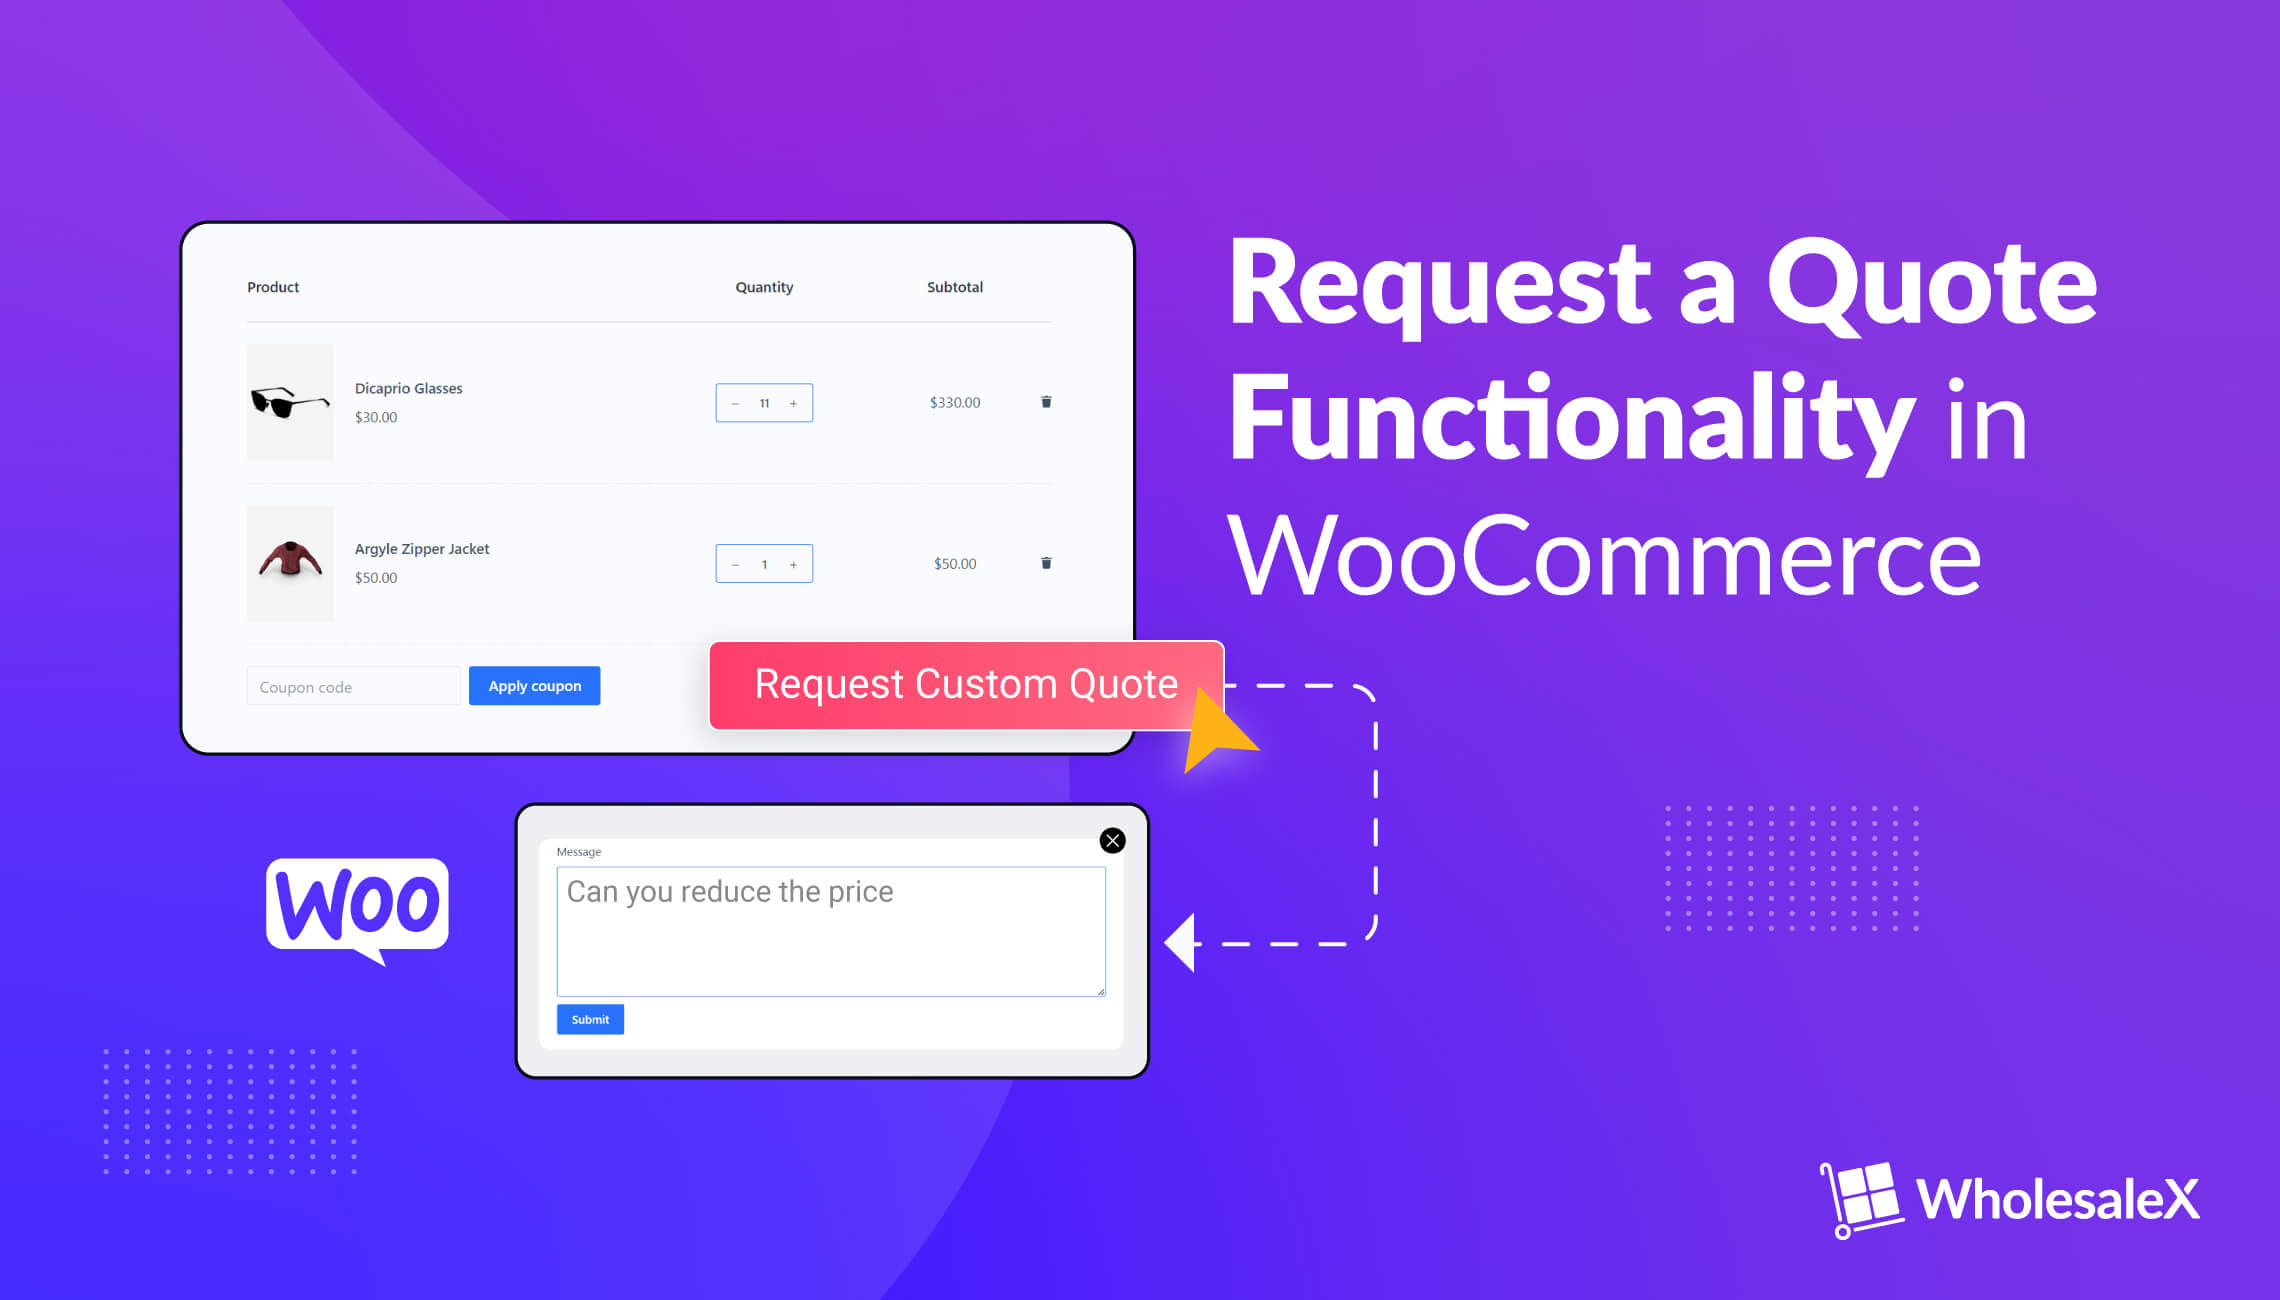 How to Add WooCommerce Request a Quote Feature in Your eCommerce Store